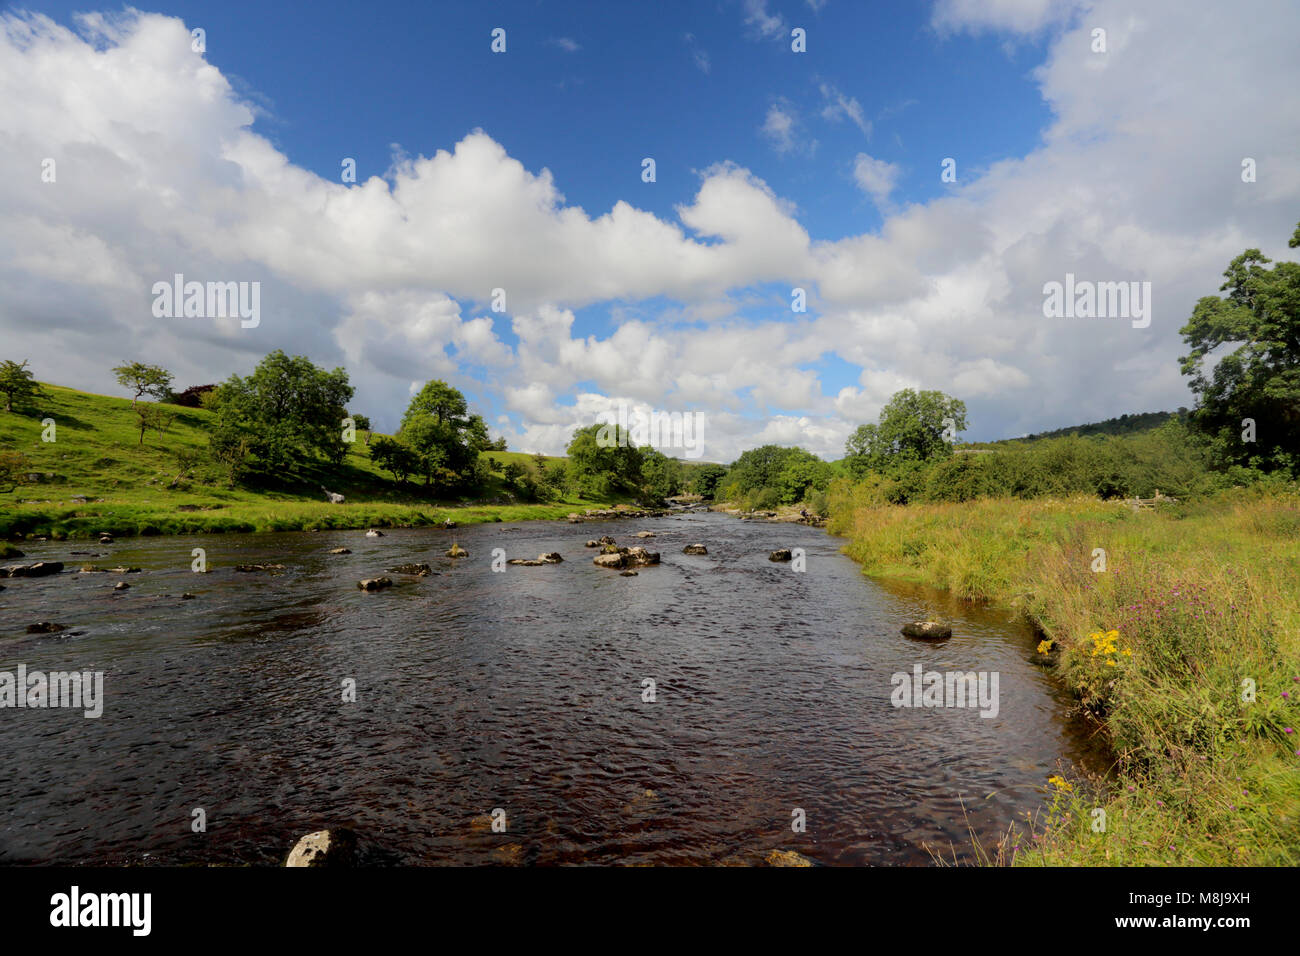 The beautiful River Wharfe in Wharfedale near Grassington, North Yorkshire, Yorkshire Dales National Park, England, on a sunny early autumn day Stock Photo